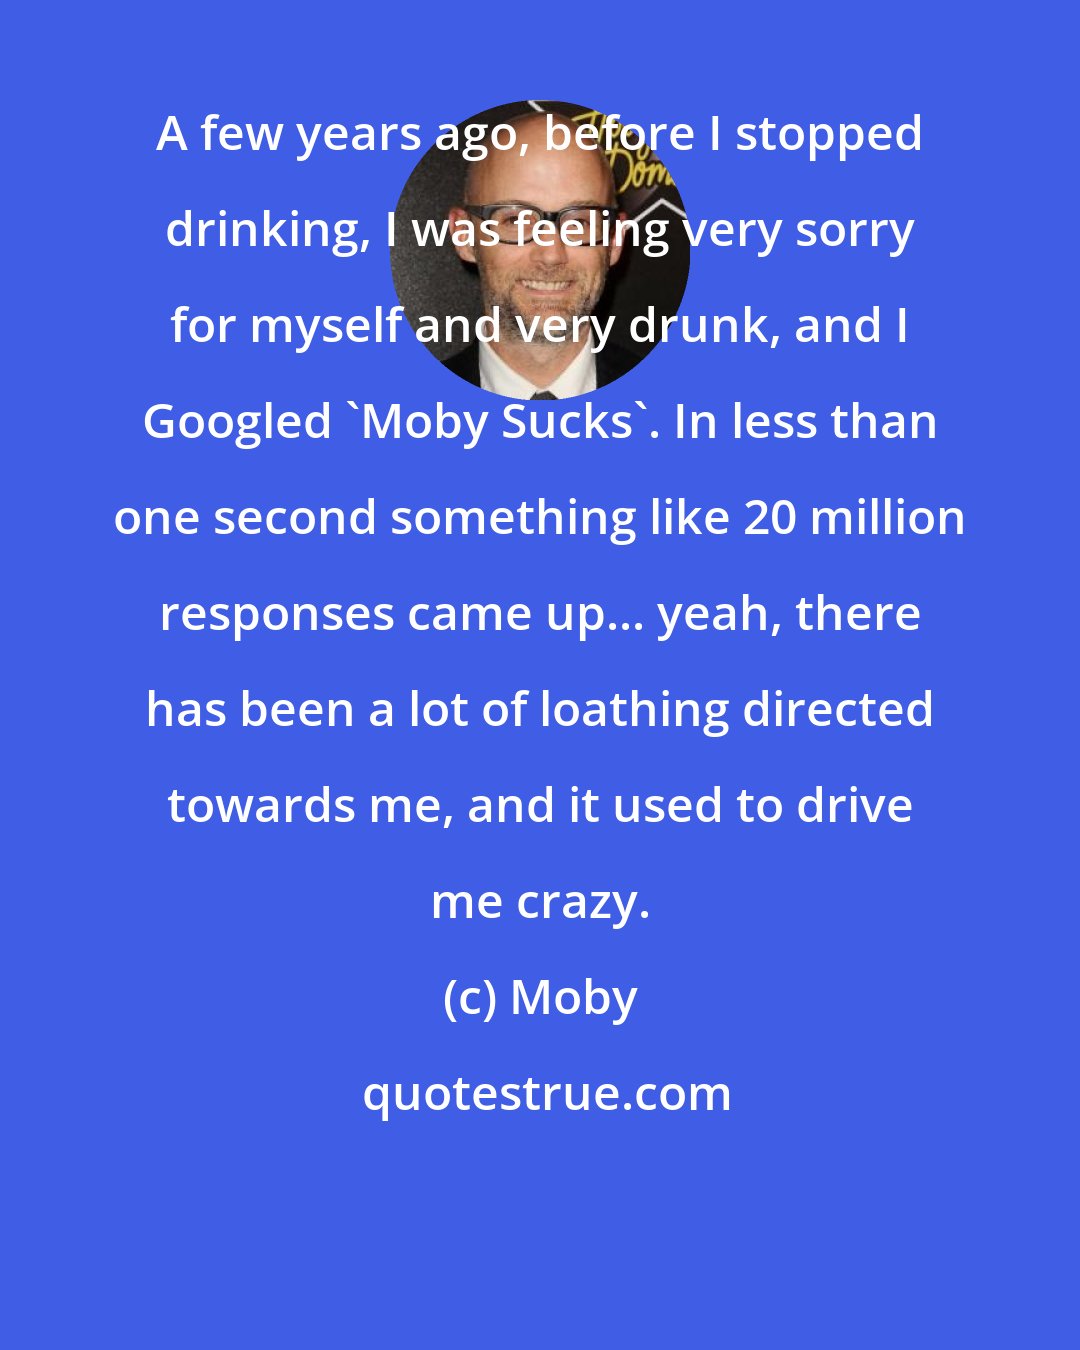 Moby: A few years ago, before I stopped drinking, I was feeling very sorry for myself and very drunk, and I Googled 'Moby Sucks'. In less than one second something like 20 million responses came up... yeah, there has been a lot of loathing directed towards me, and it used to drive me crazy.